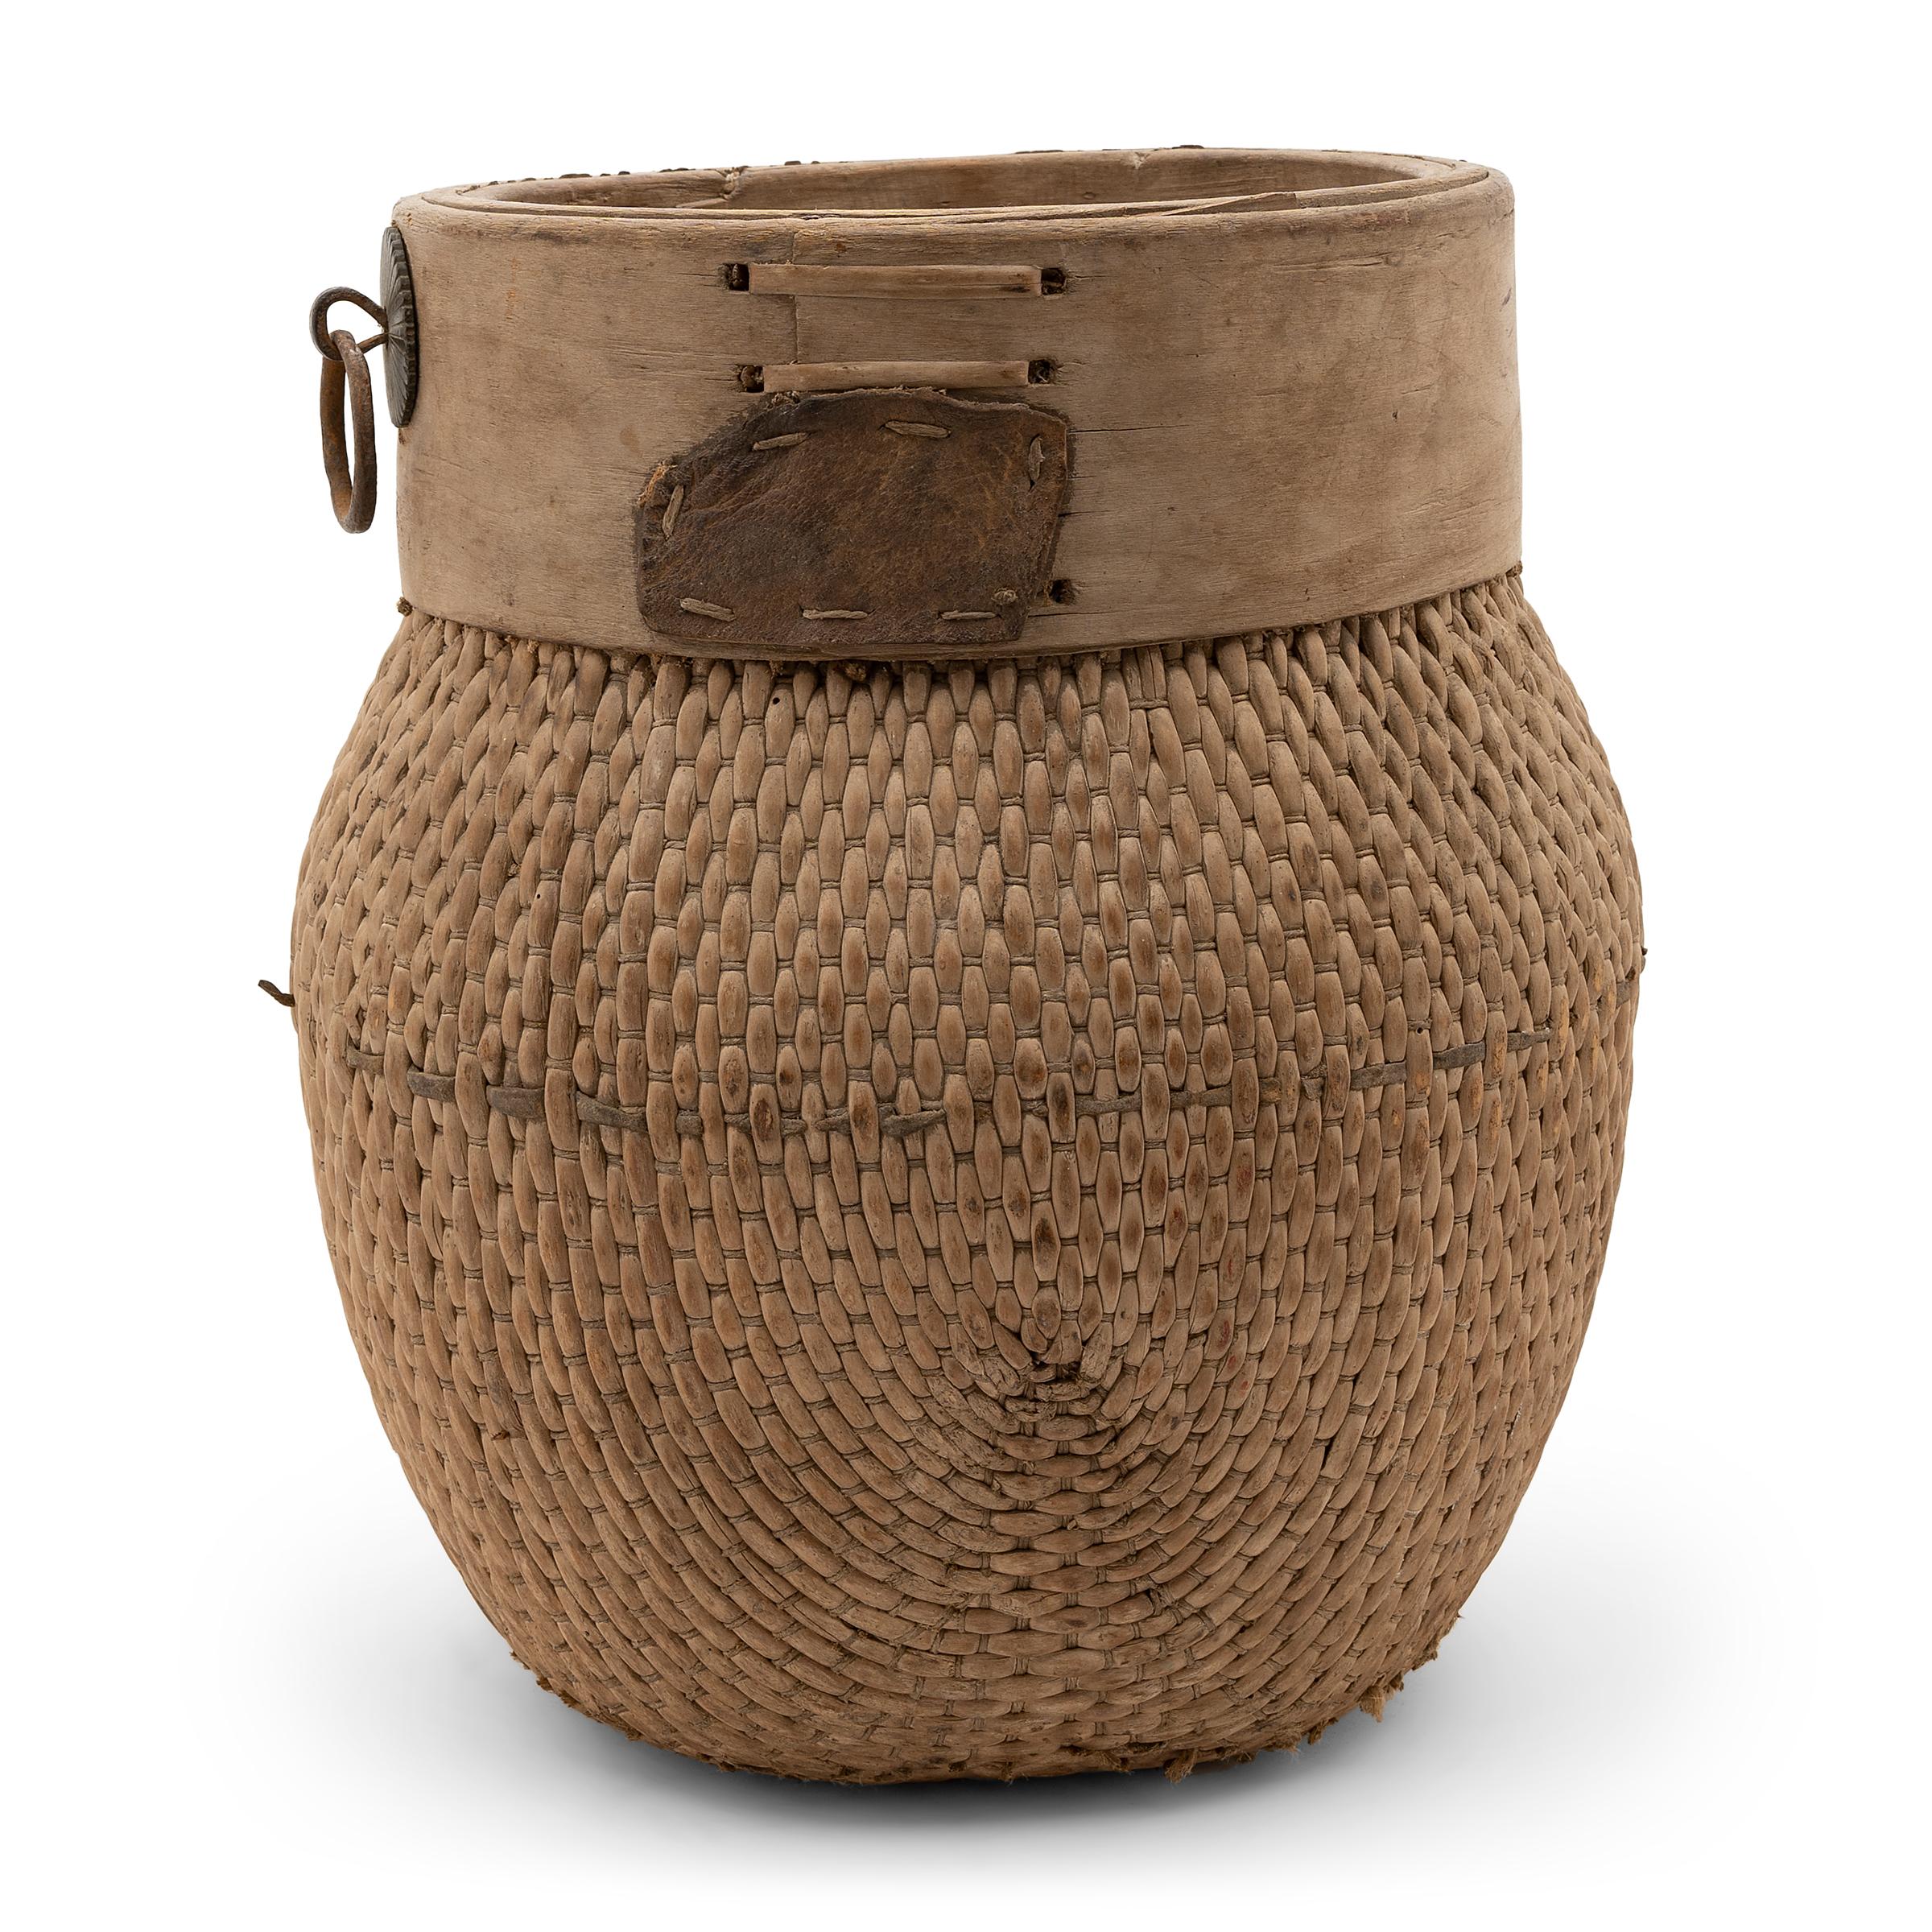 Centuries ago, a woven reed fisherman’s basket such as this would have been common in rural China as an everyday item, used until it became worn through. This particular example remains in beautiful condition with a light brown color and slightly